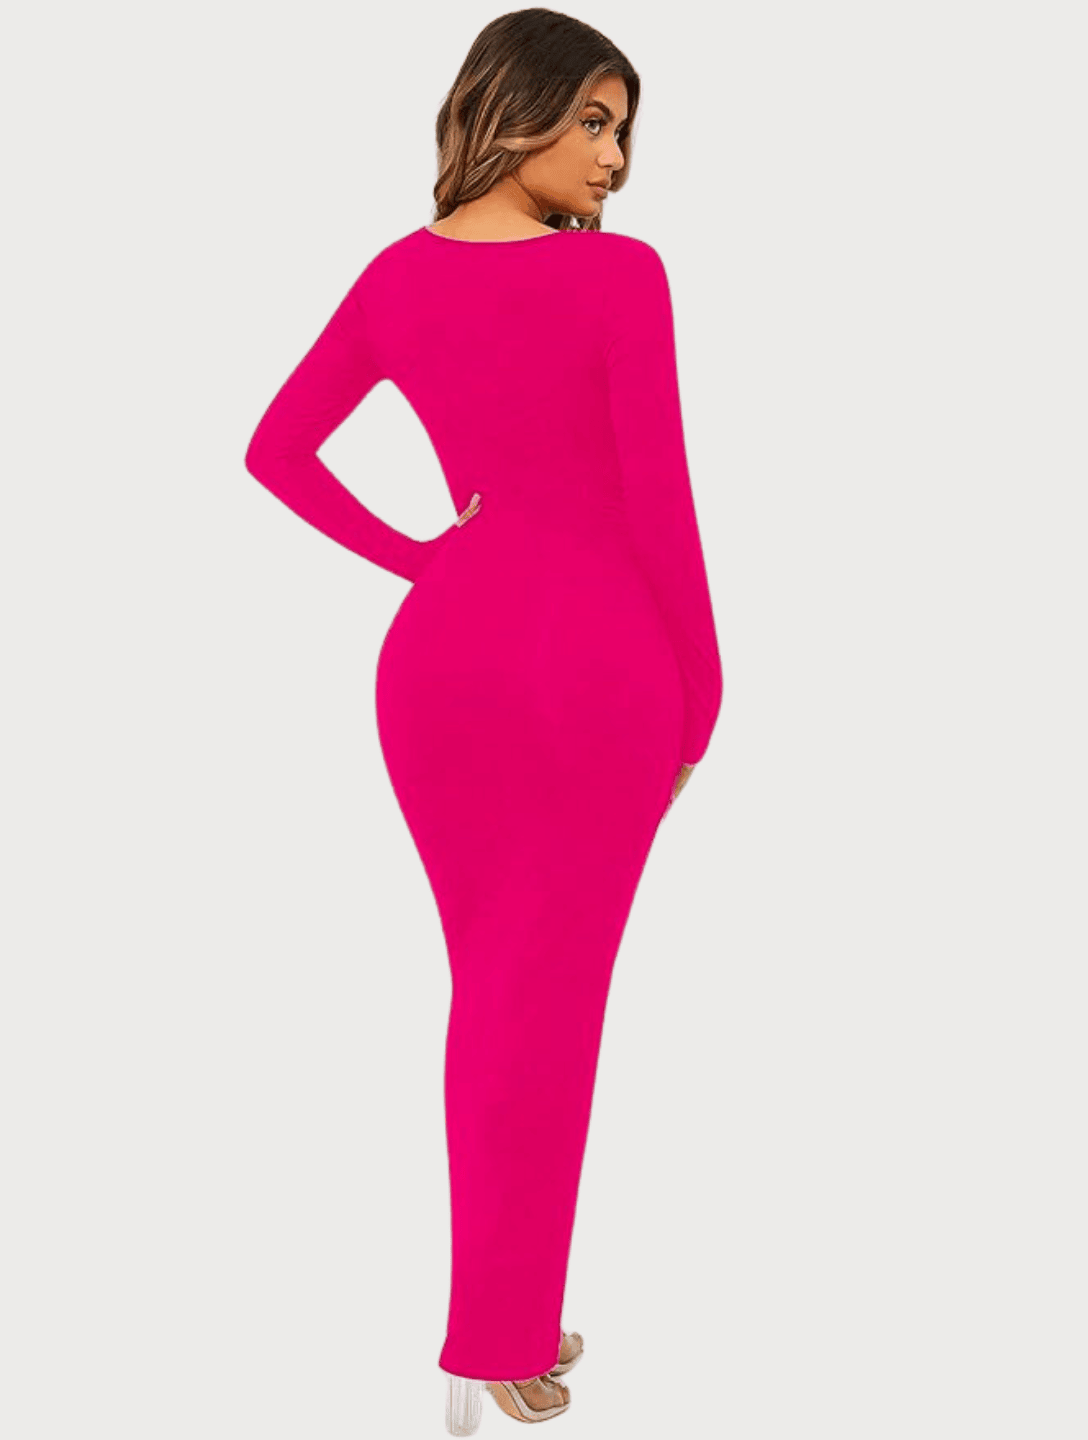 Get Glam'd — Empow(h)er Body shaping Dress